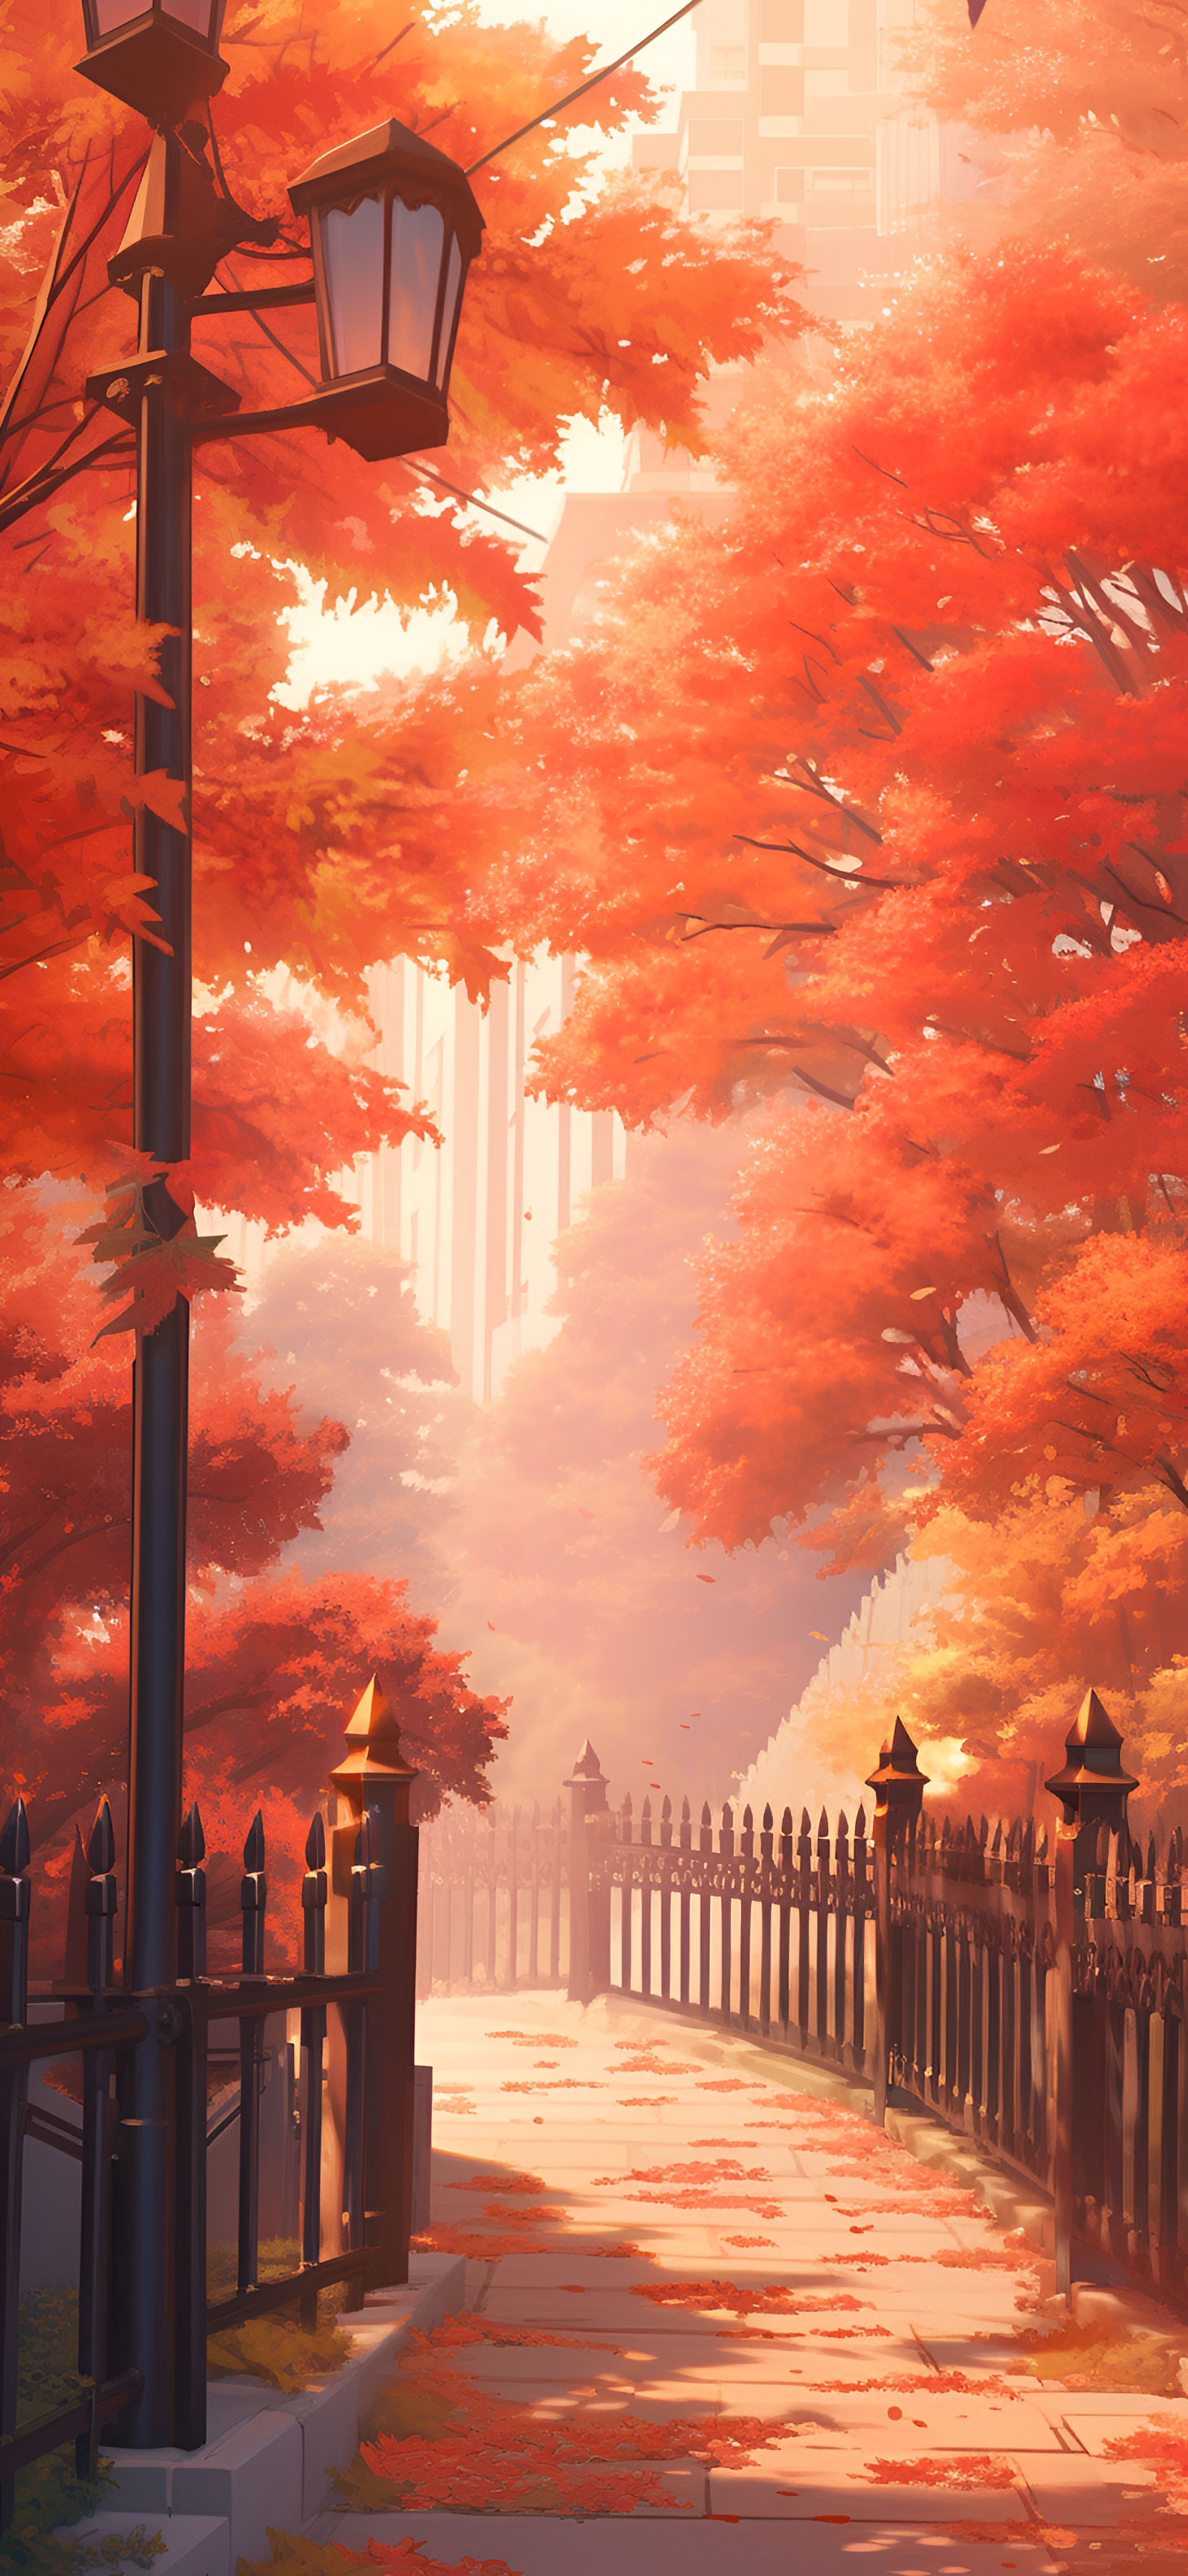 Magical Torii Gate in Autumn Japanese Forest - Aesthetic Anime and  Manga-inspired Design